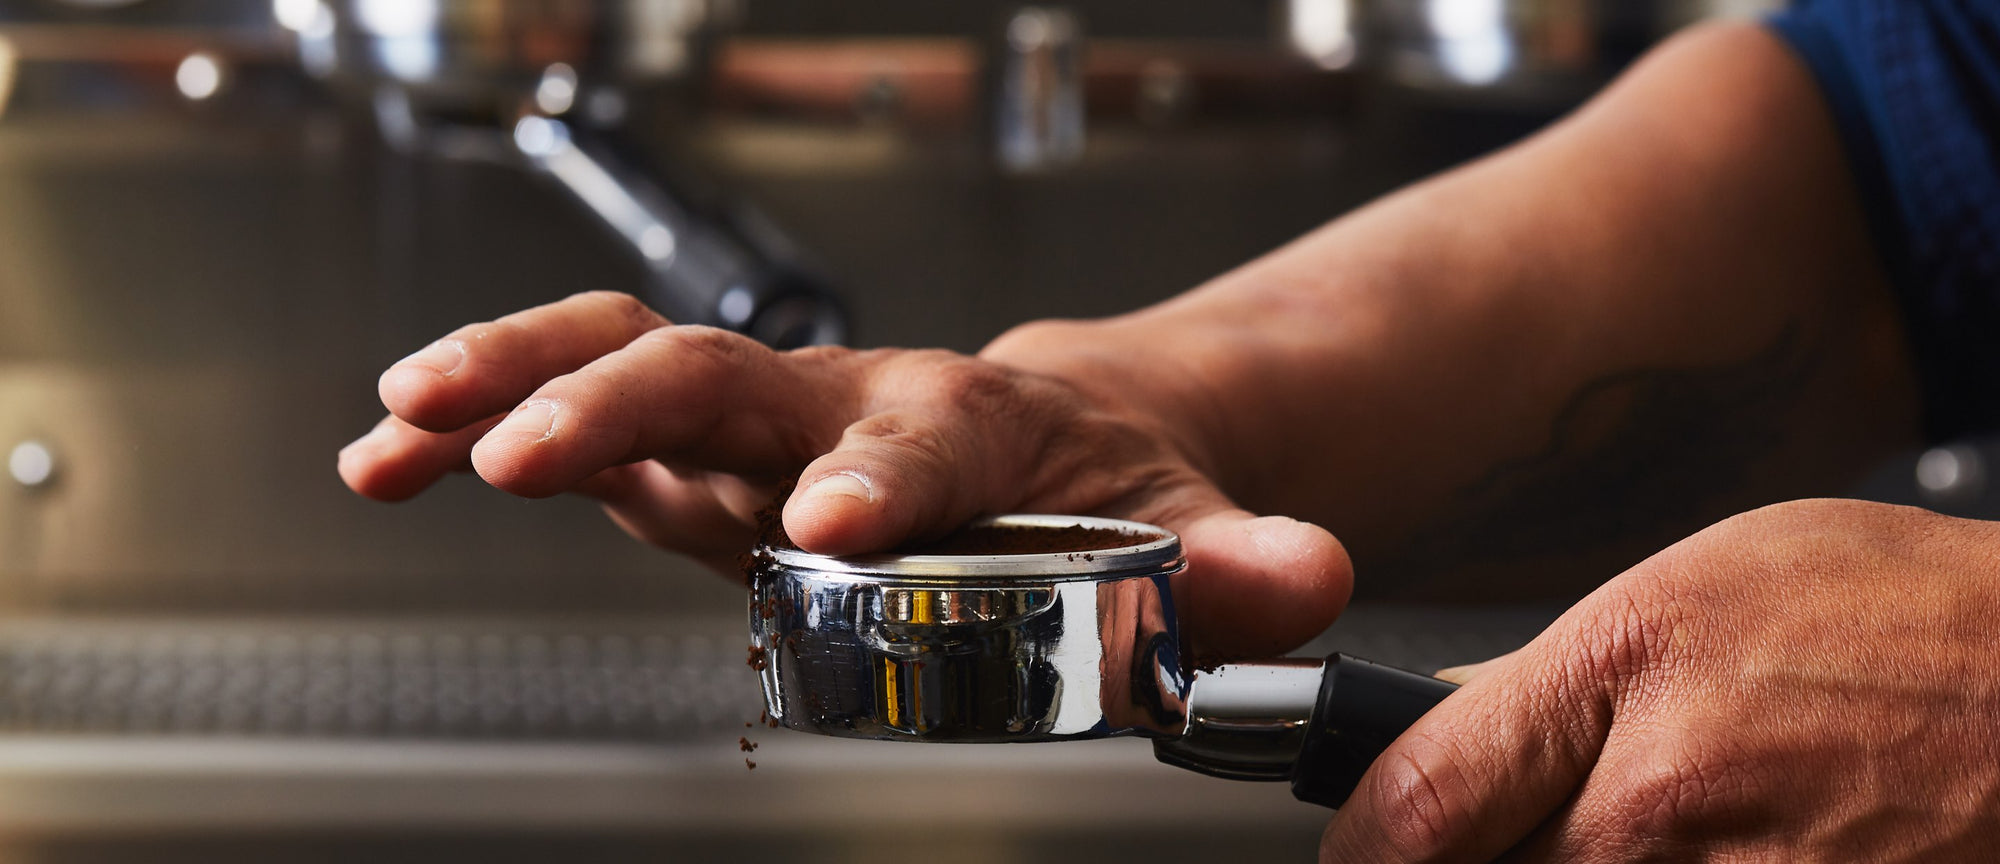 a hand distributing coffee from a bottomless portafilter